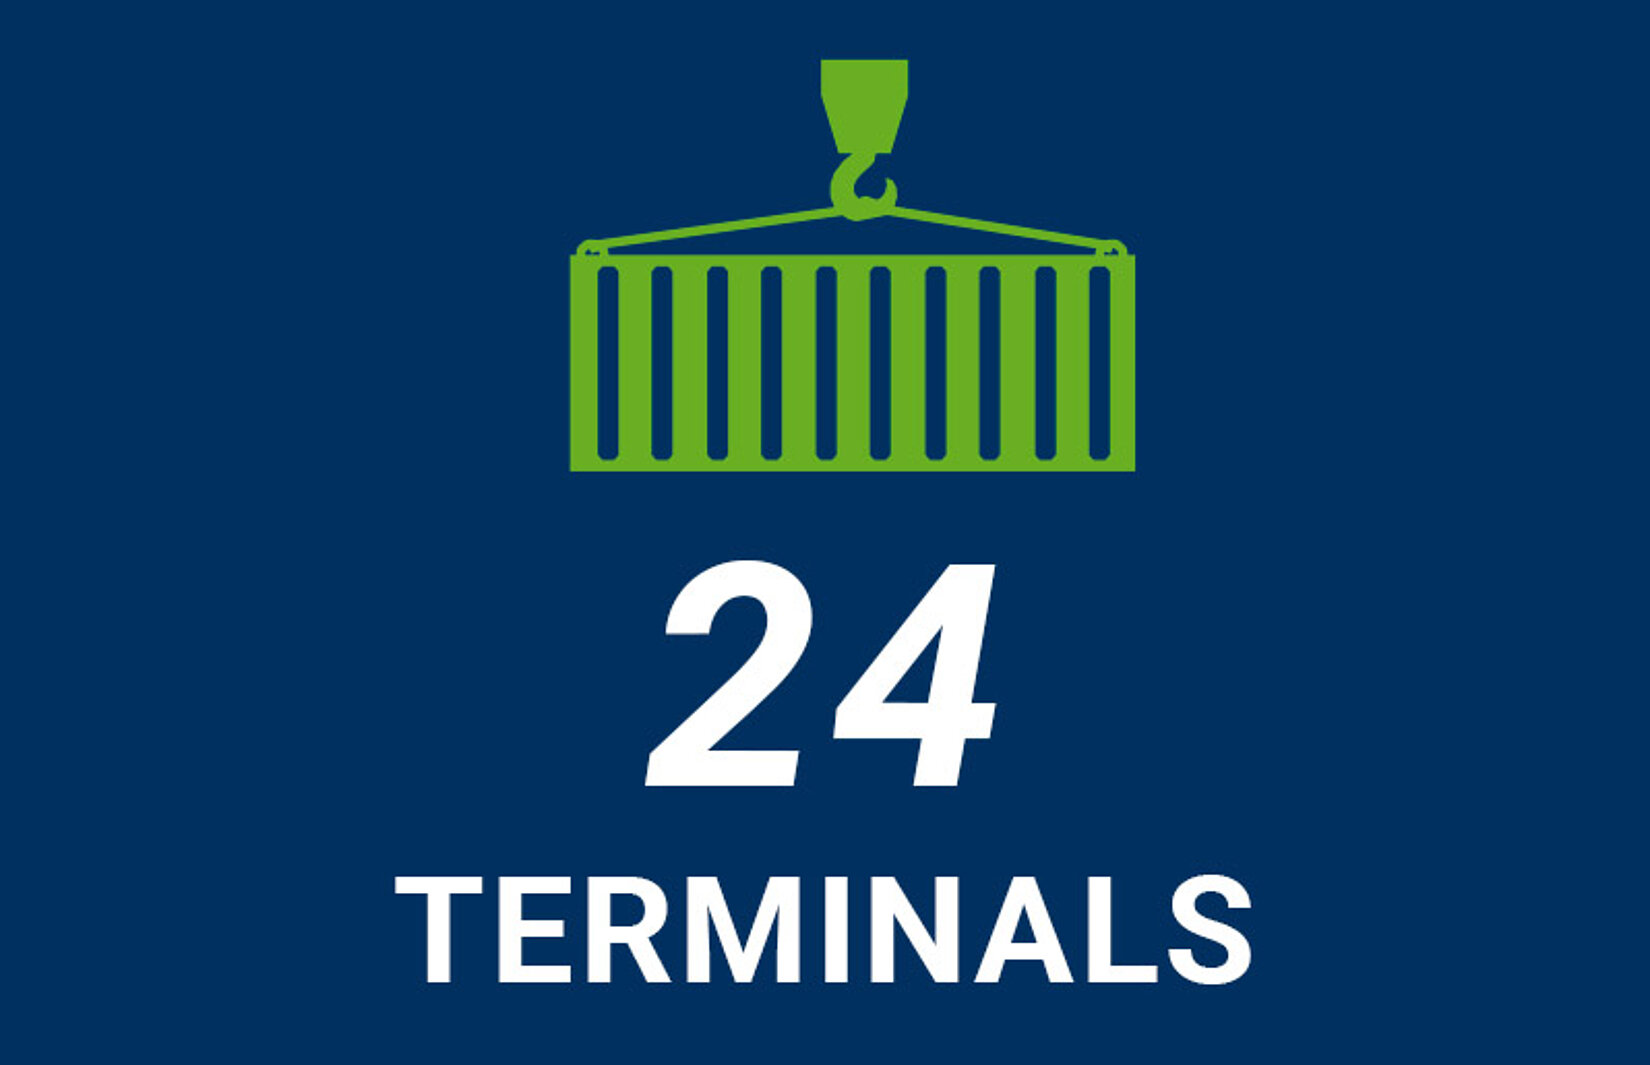 Graphic with container on hook as symbol for terminals